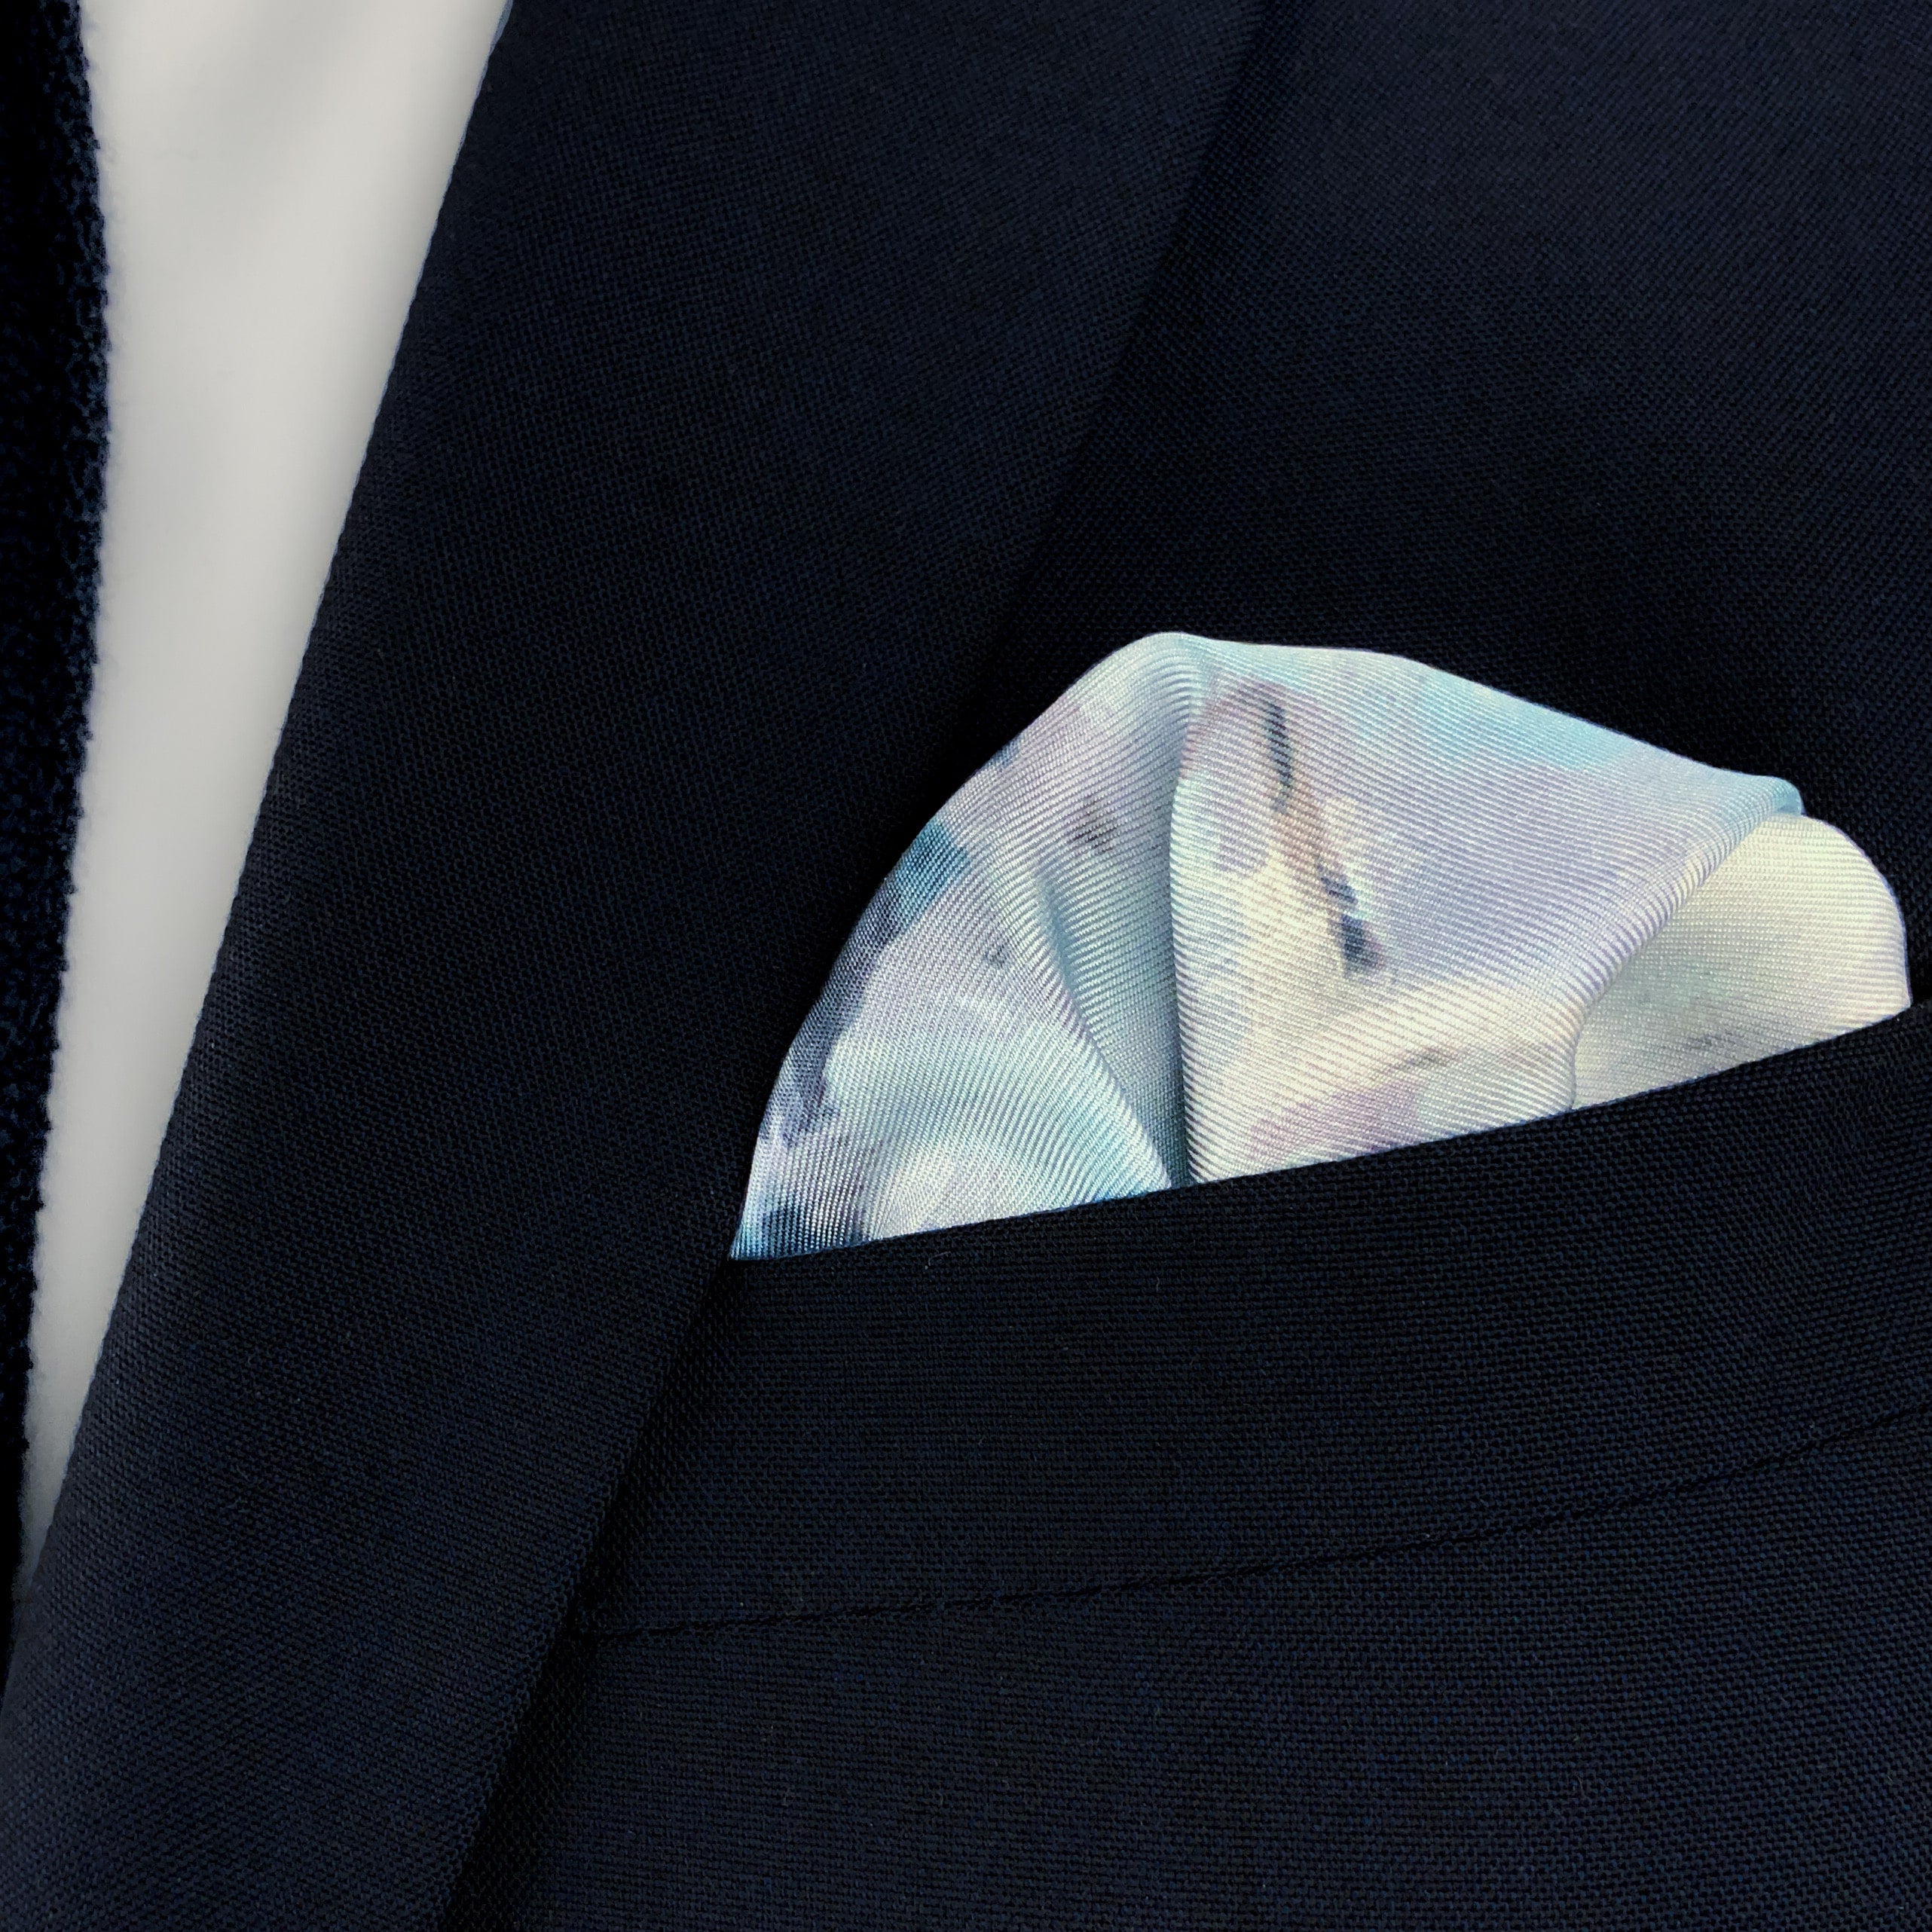 The Magpie historical fine art silk pocket square folded and placed in the breast pocket of a navy blue suit